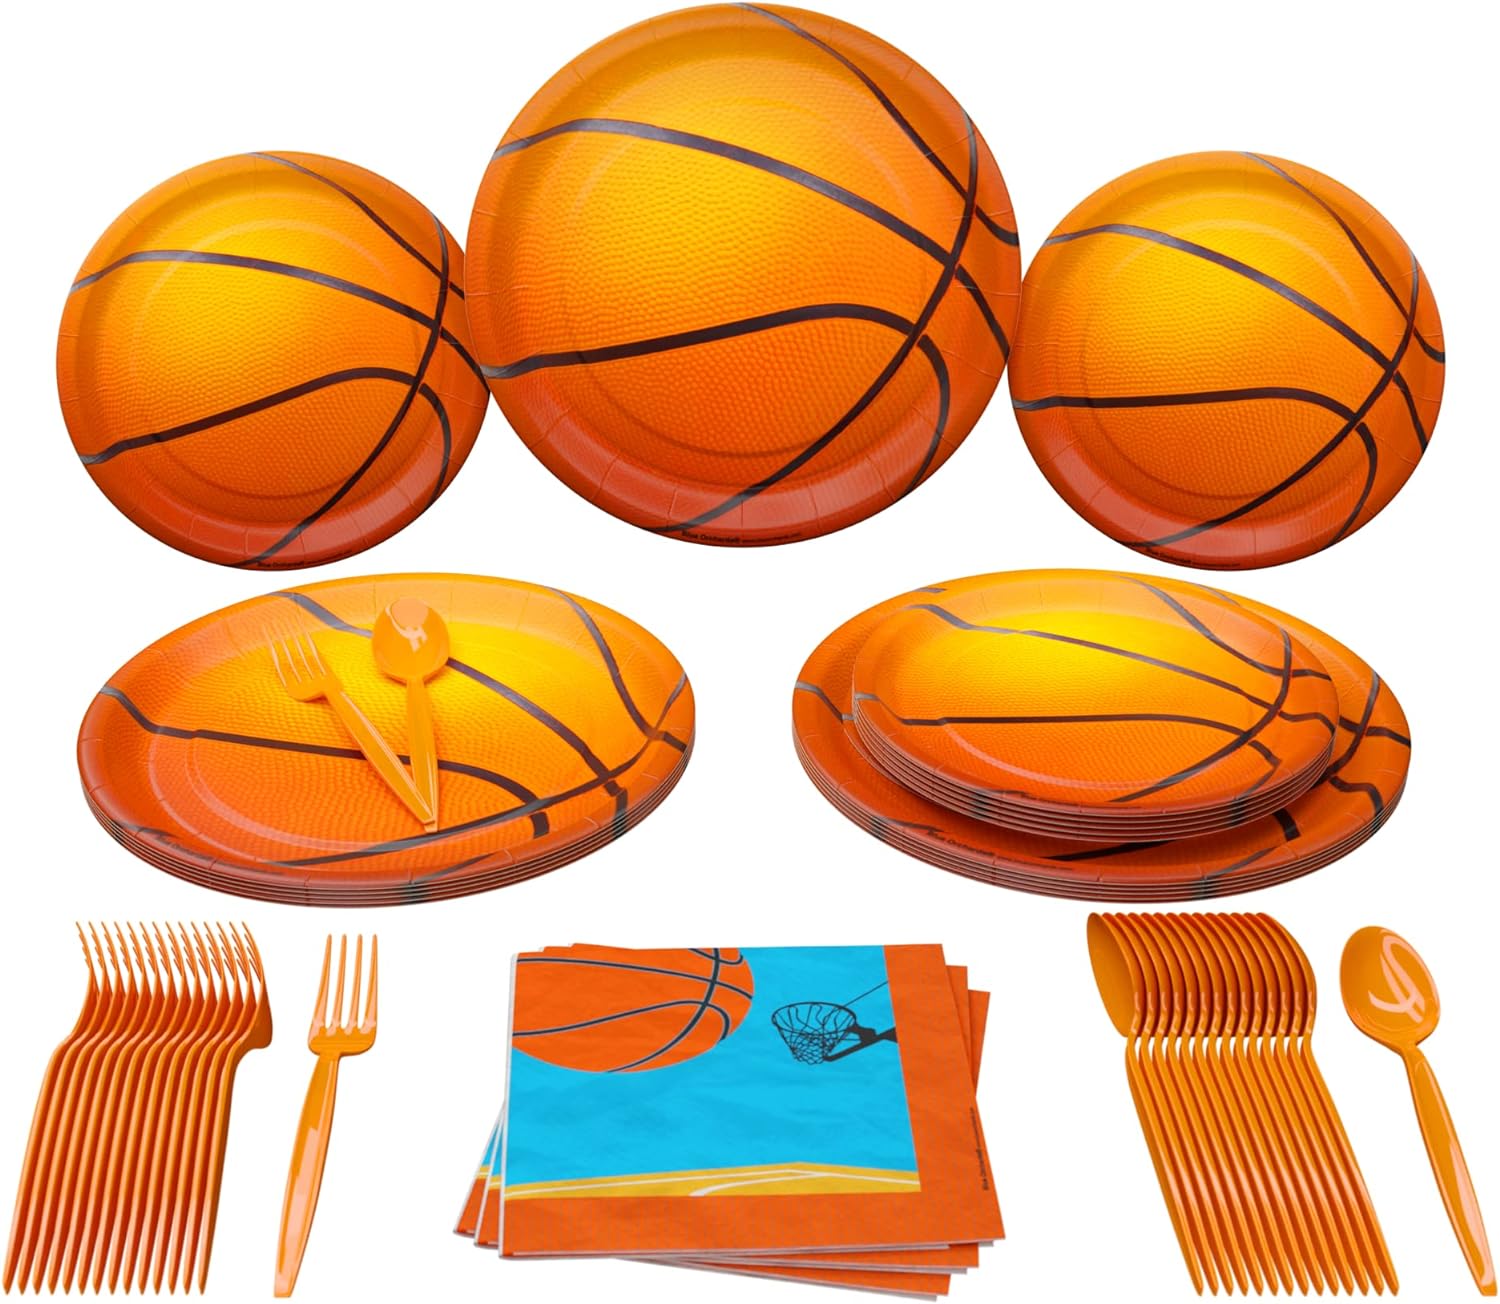 Basketball Party Supplies Packs (For 16 Guests)